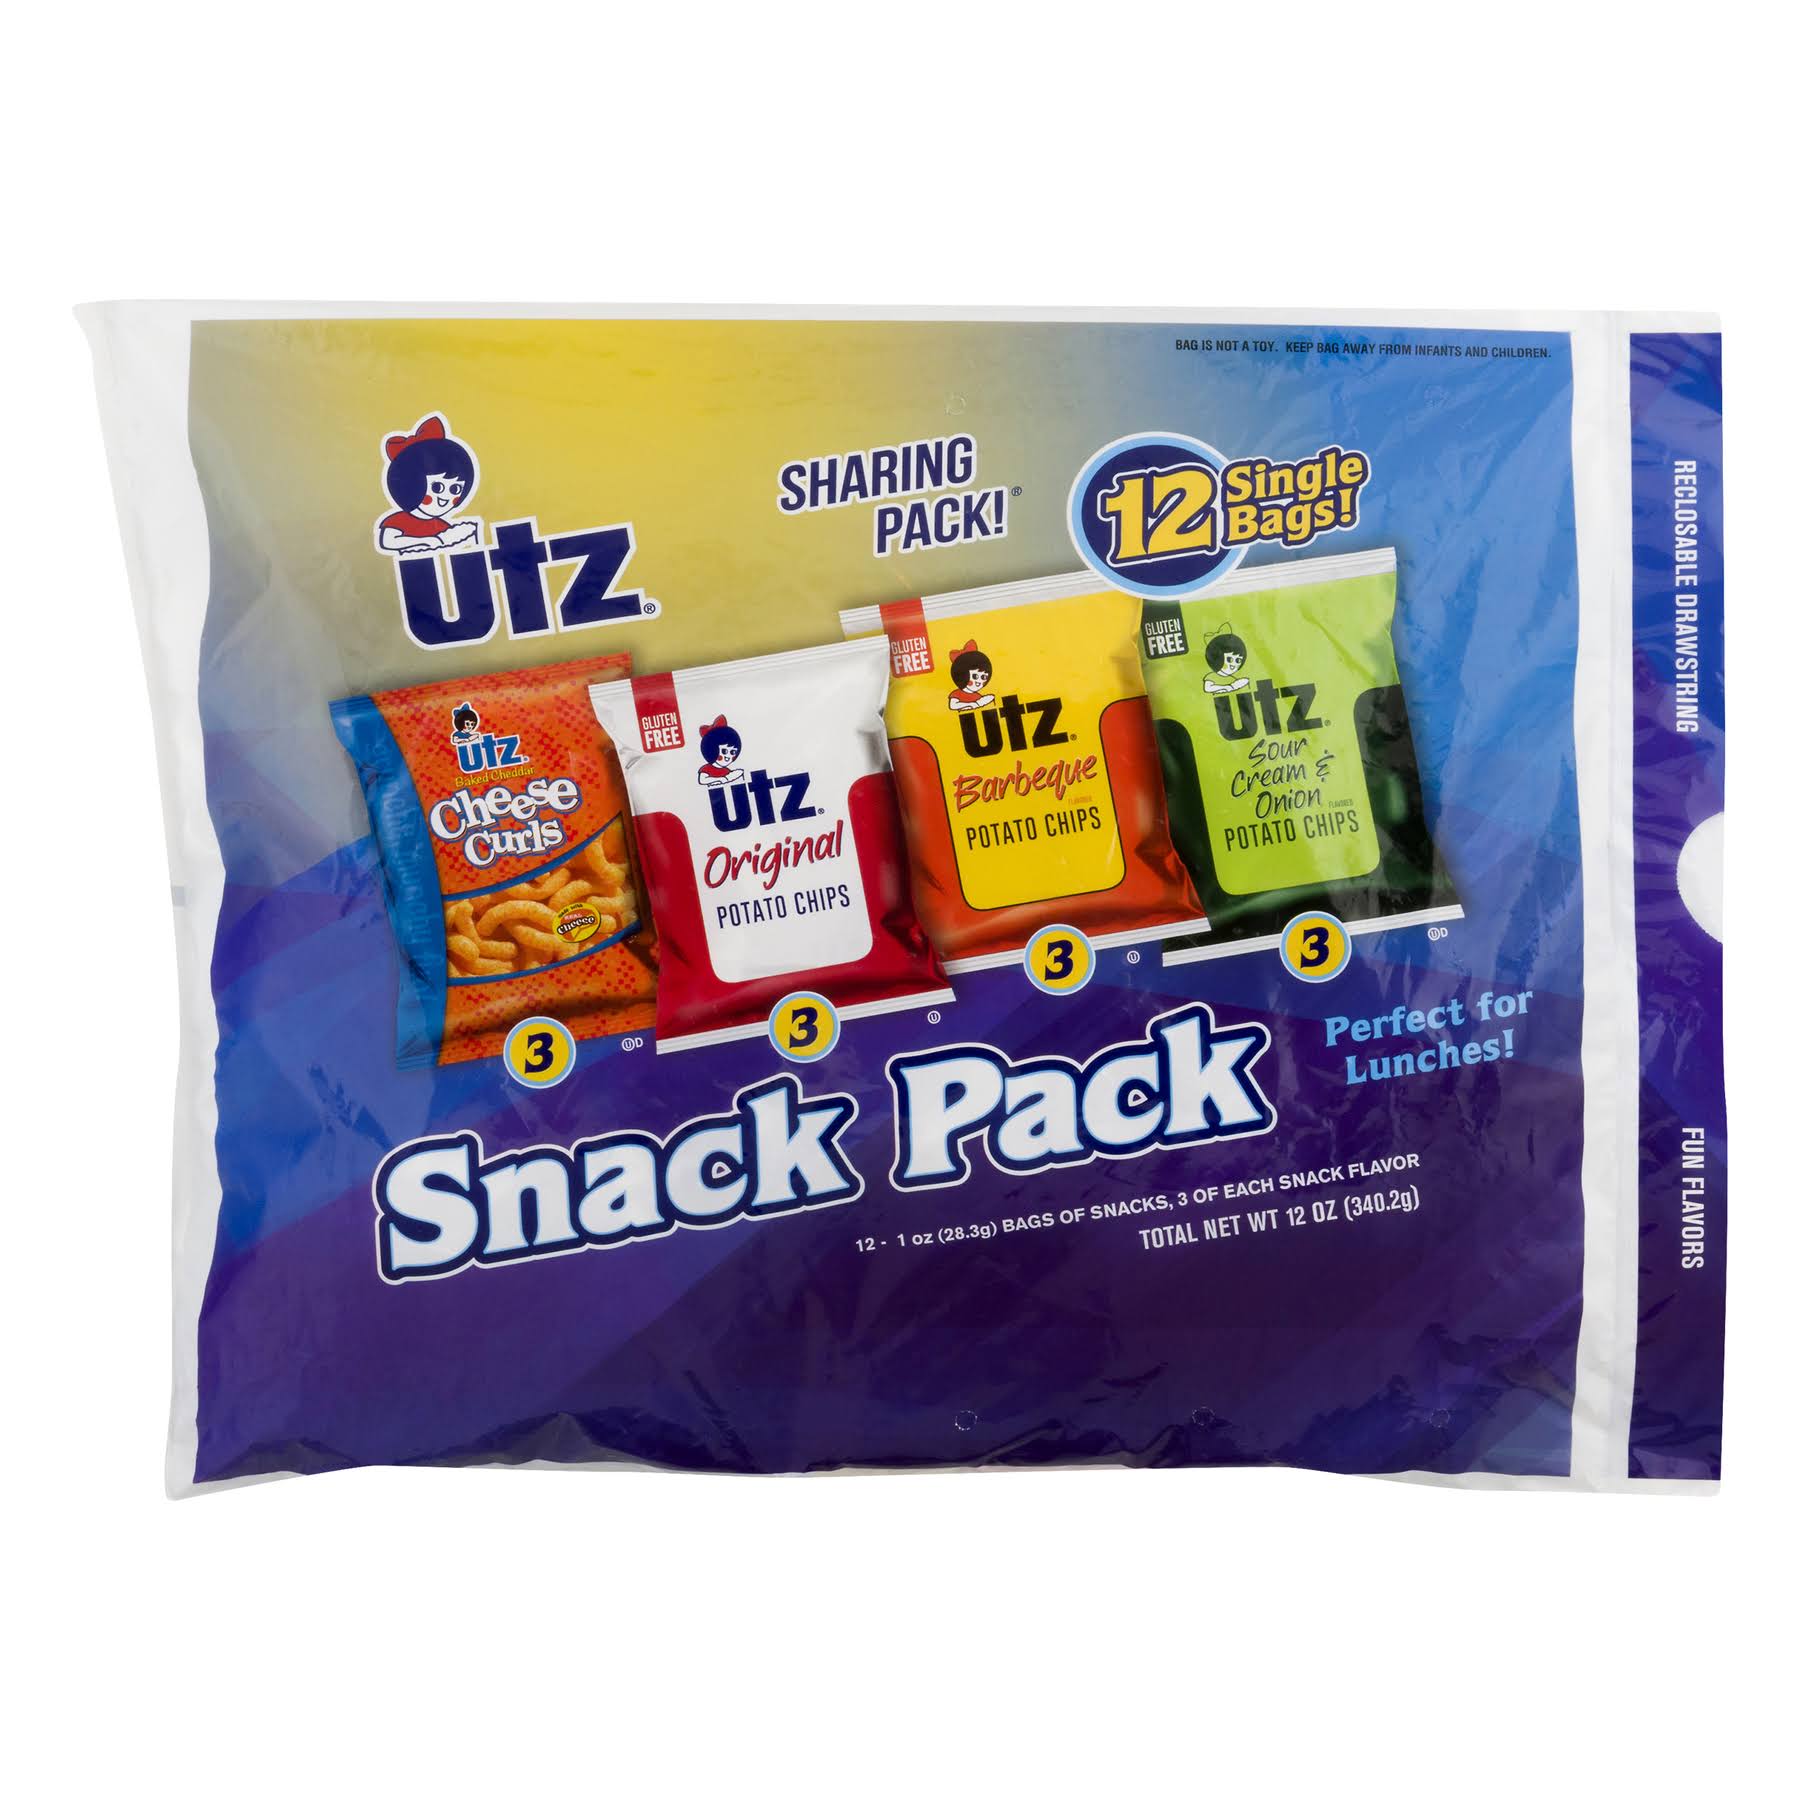 Utz Snack Pack, Assorted, Sharing Pack - 12 pack, 1 oz bags